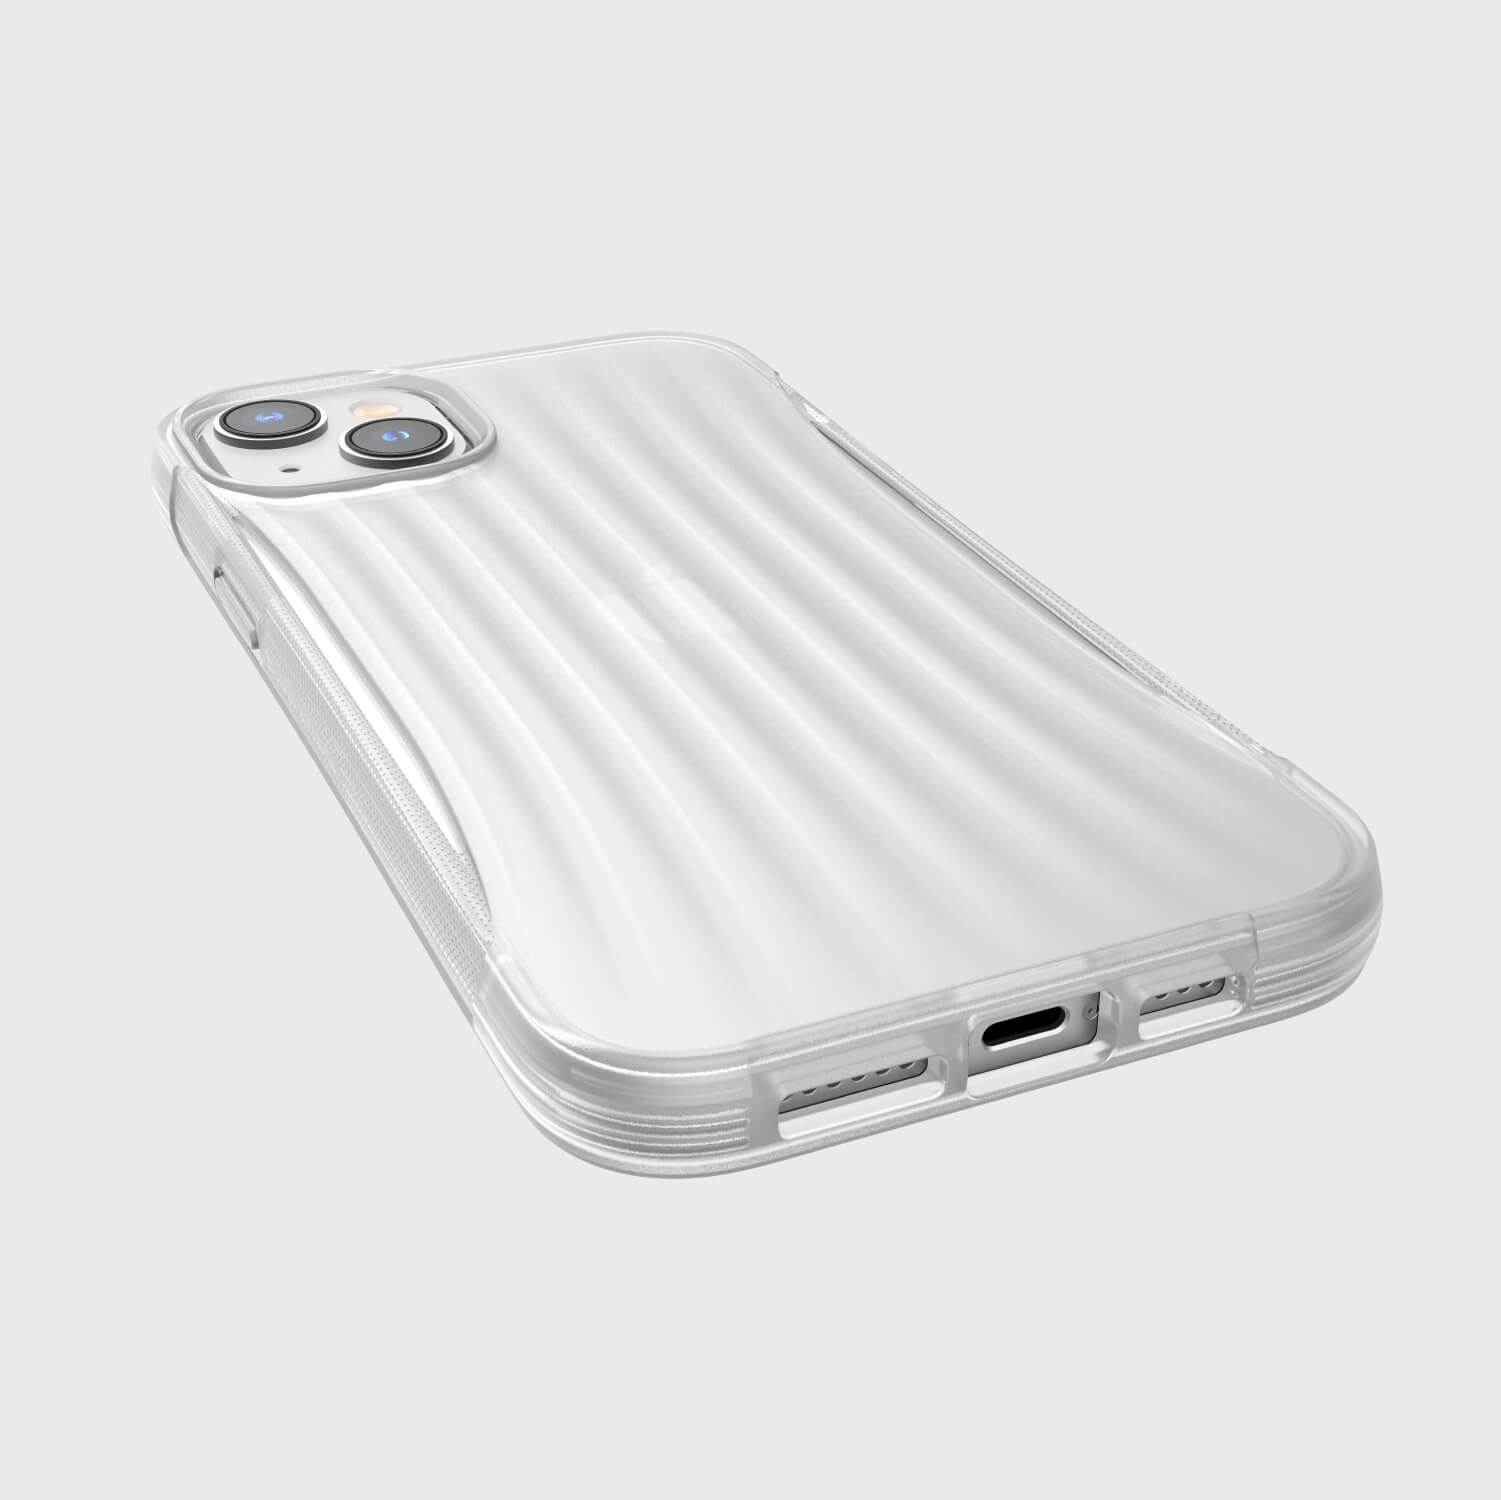 A pocket-friendly iPhone 14 Plus Case ~ Clutch featuring a sleek design on a white background.